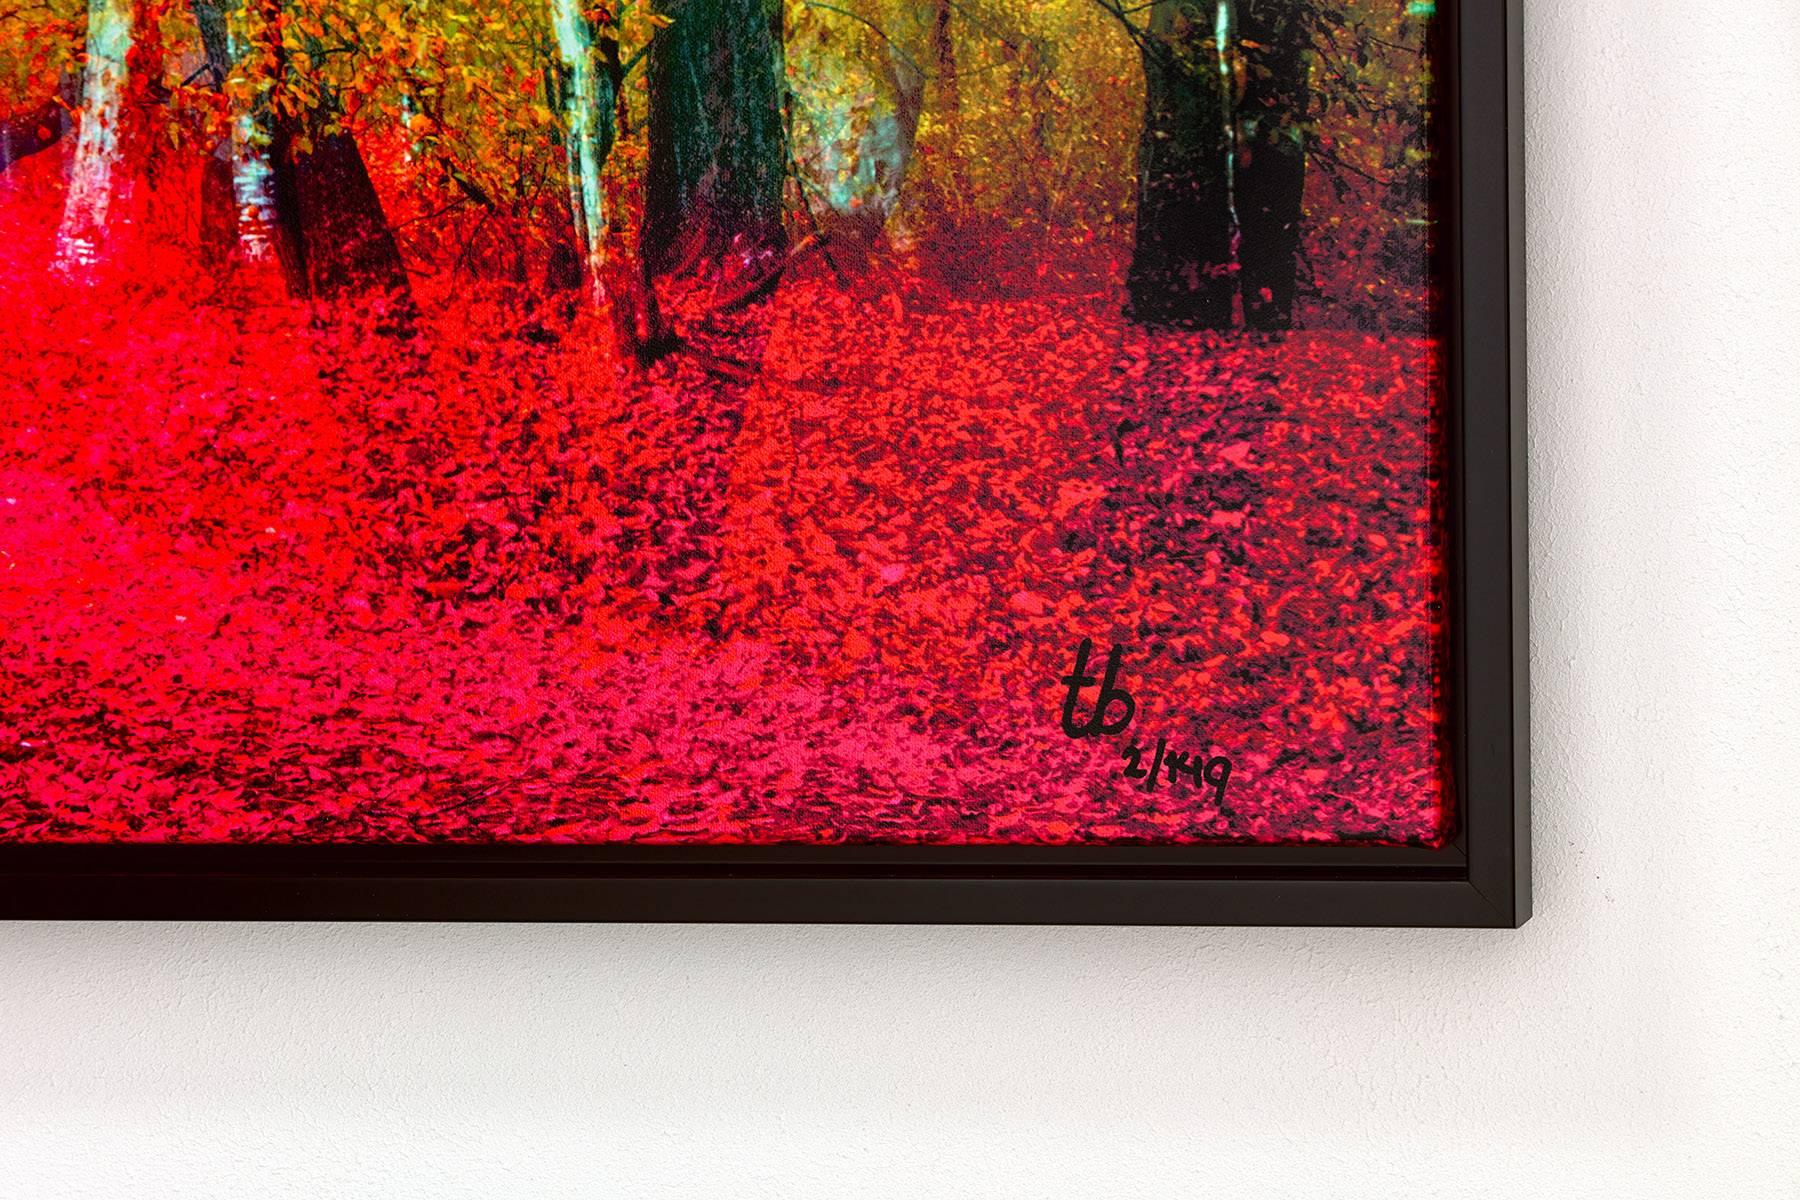 
Original Fine Art Photography by Thomas Bijen for 99 Limited Editions
Pink Forest’s exclusive Gold Limited Edition of only 149 is available in: 
151x101 CM (Unframed: 145x95cm) 
59x40 Inches 
_________________________________

An enchanting forest